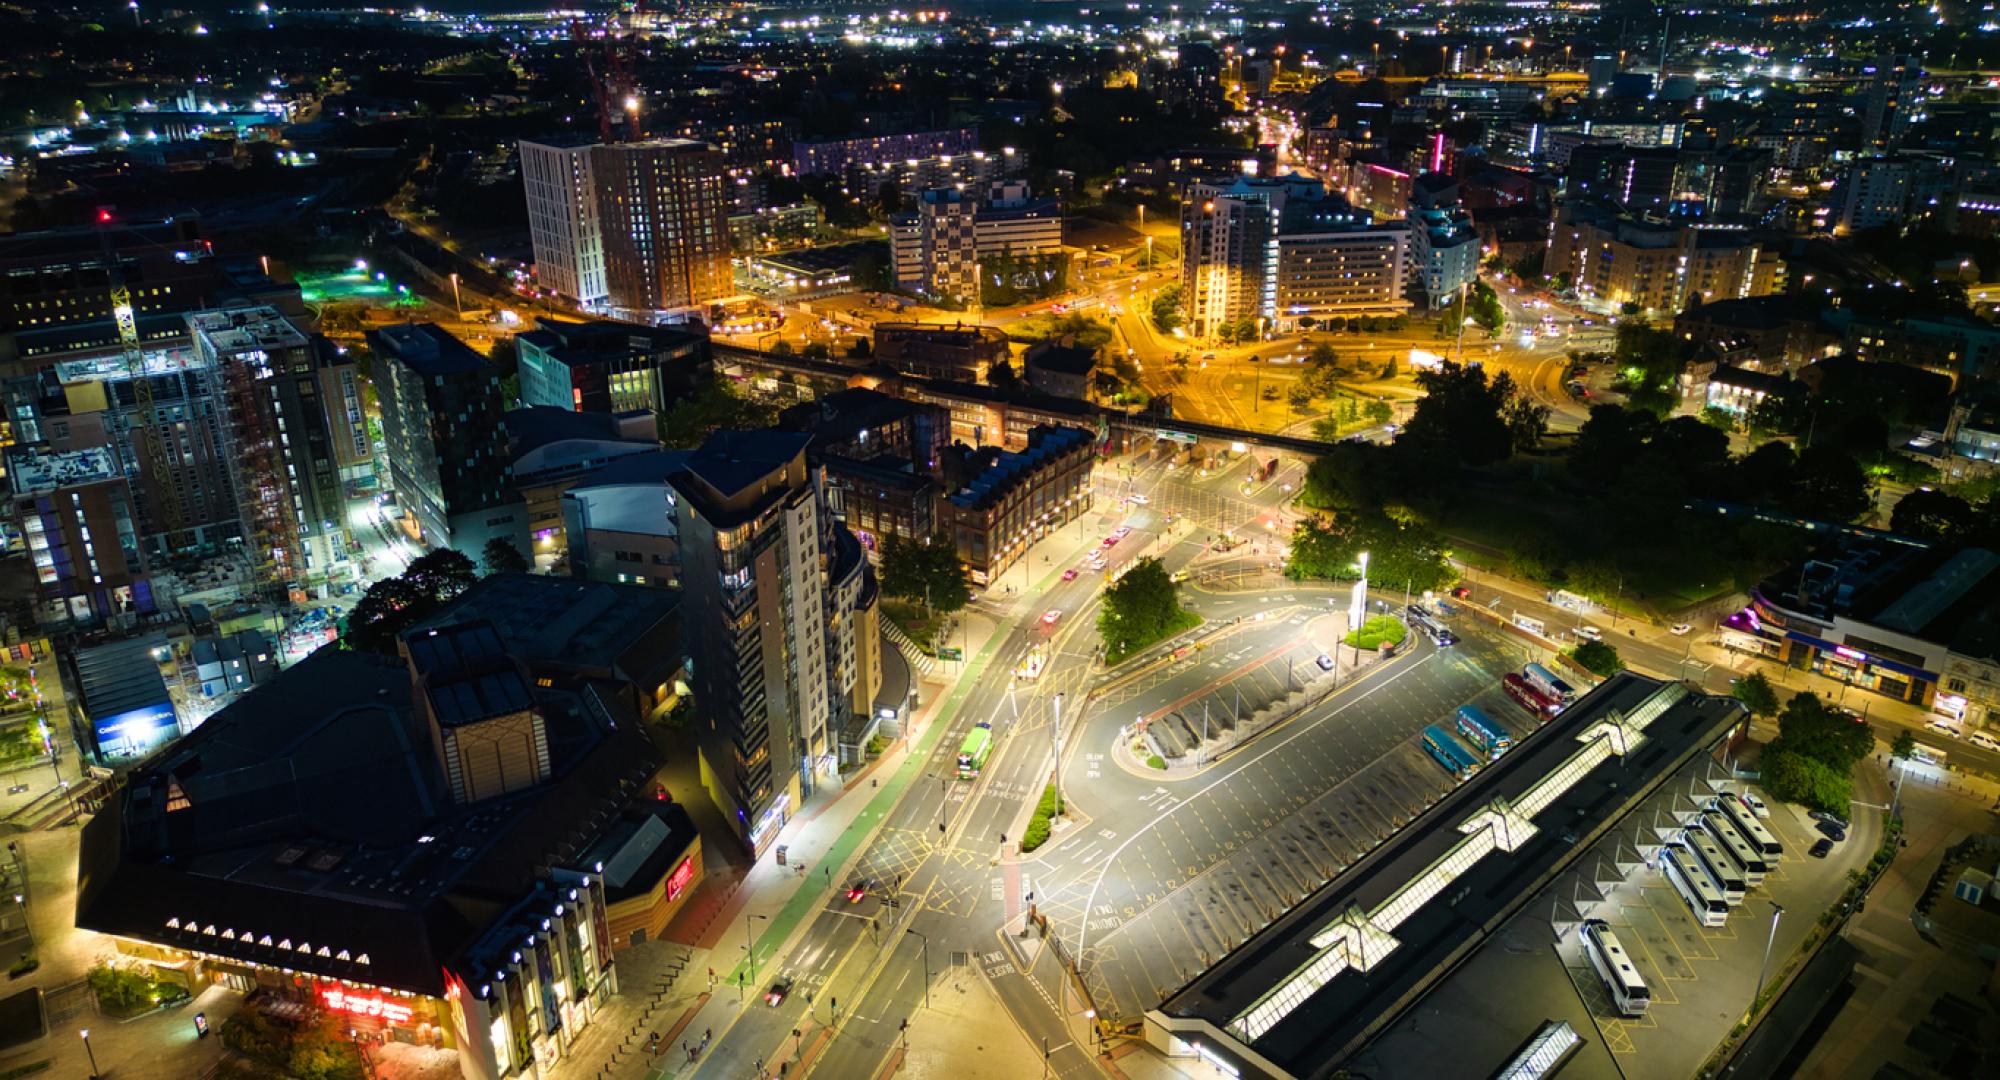 Aerial view with nightlife in Leeds